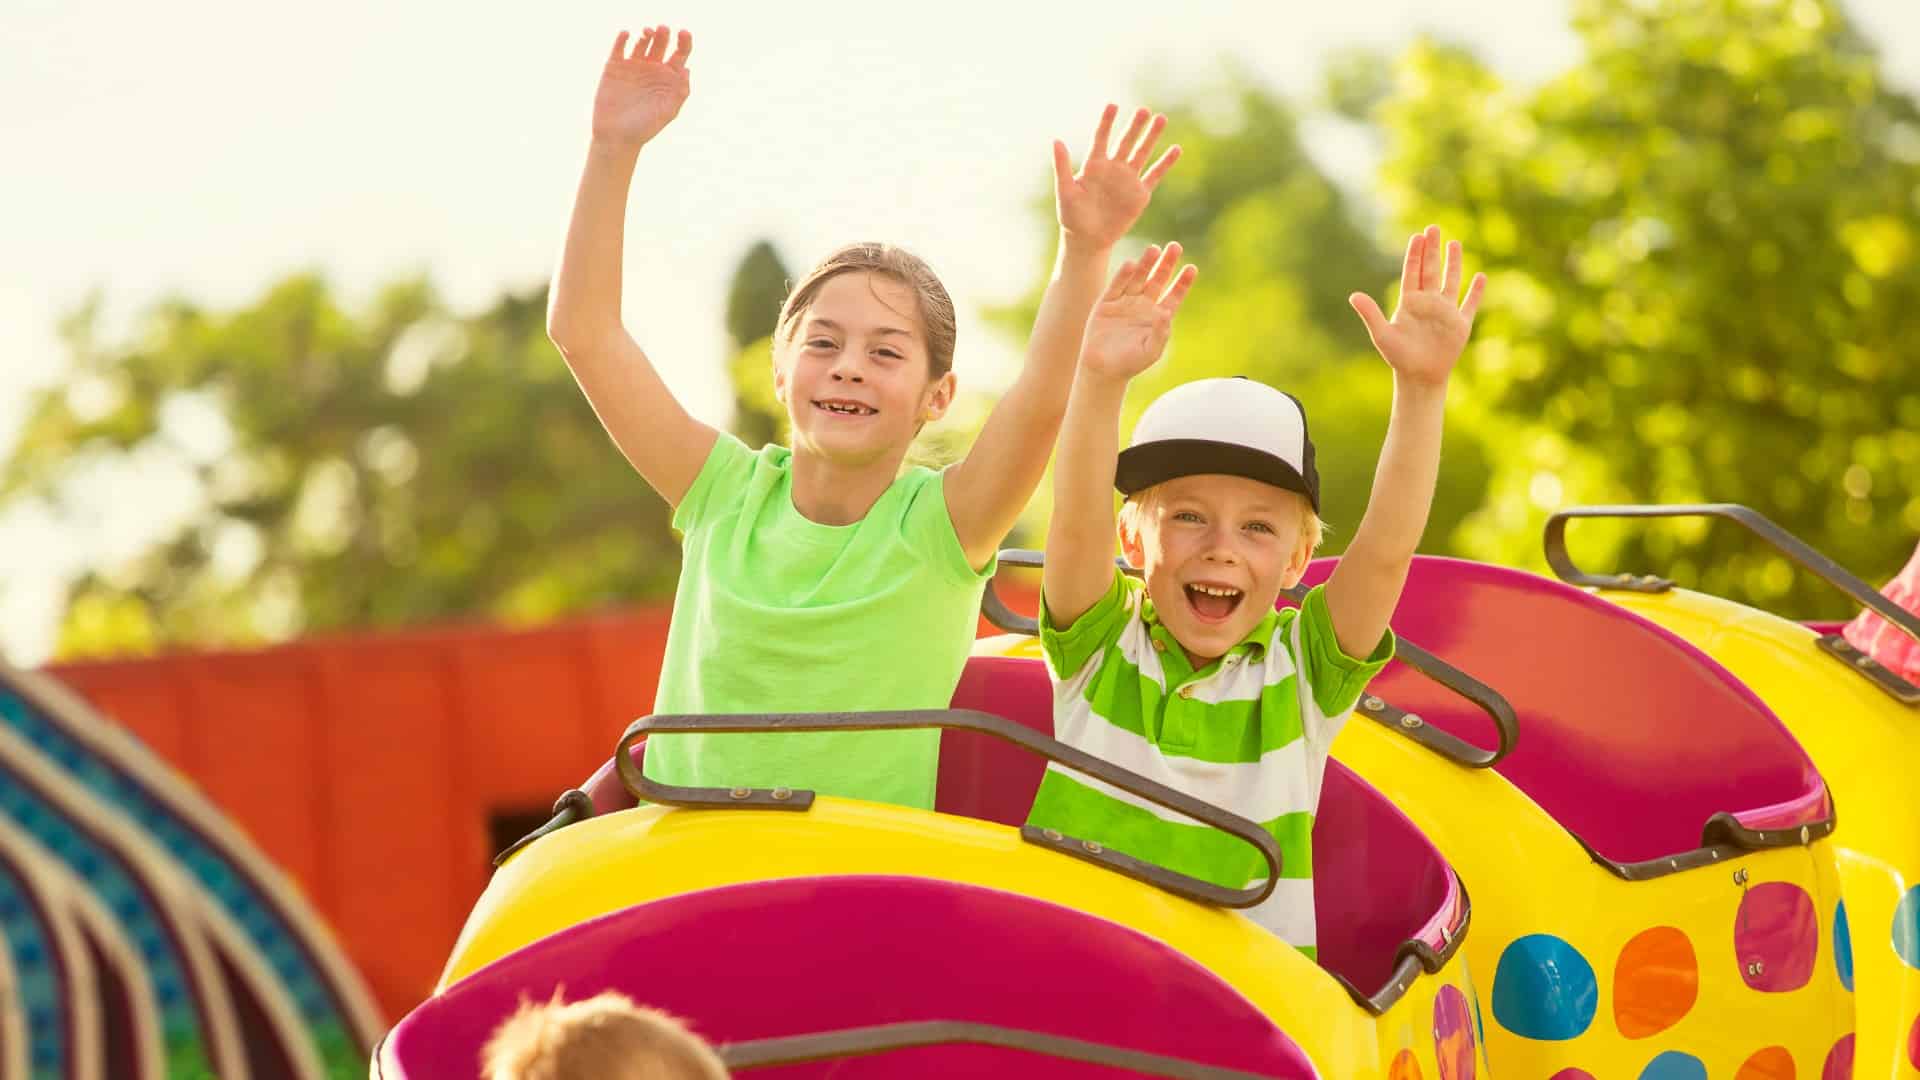 Two children put their hands in the air on a rollercoaster ride.